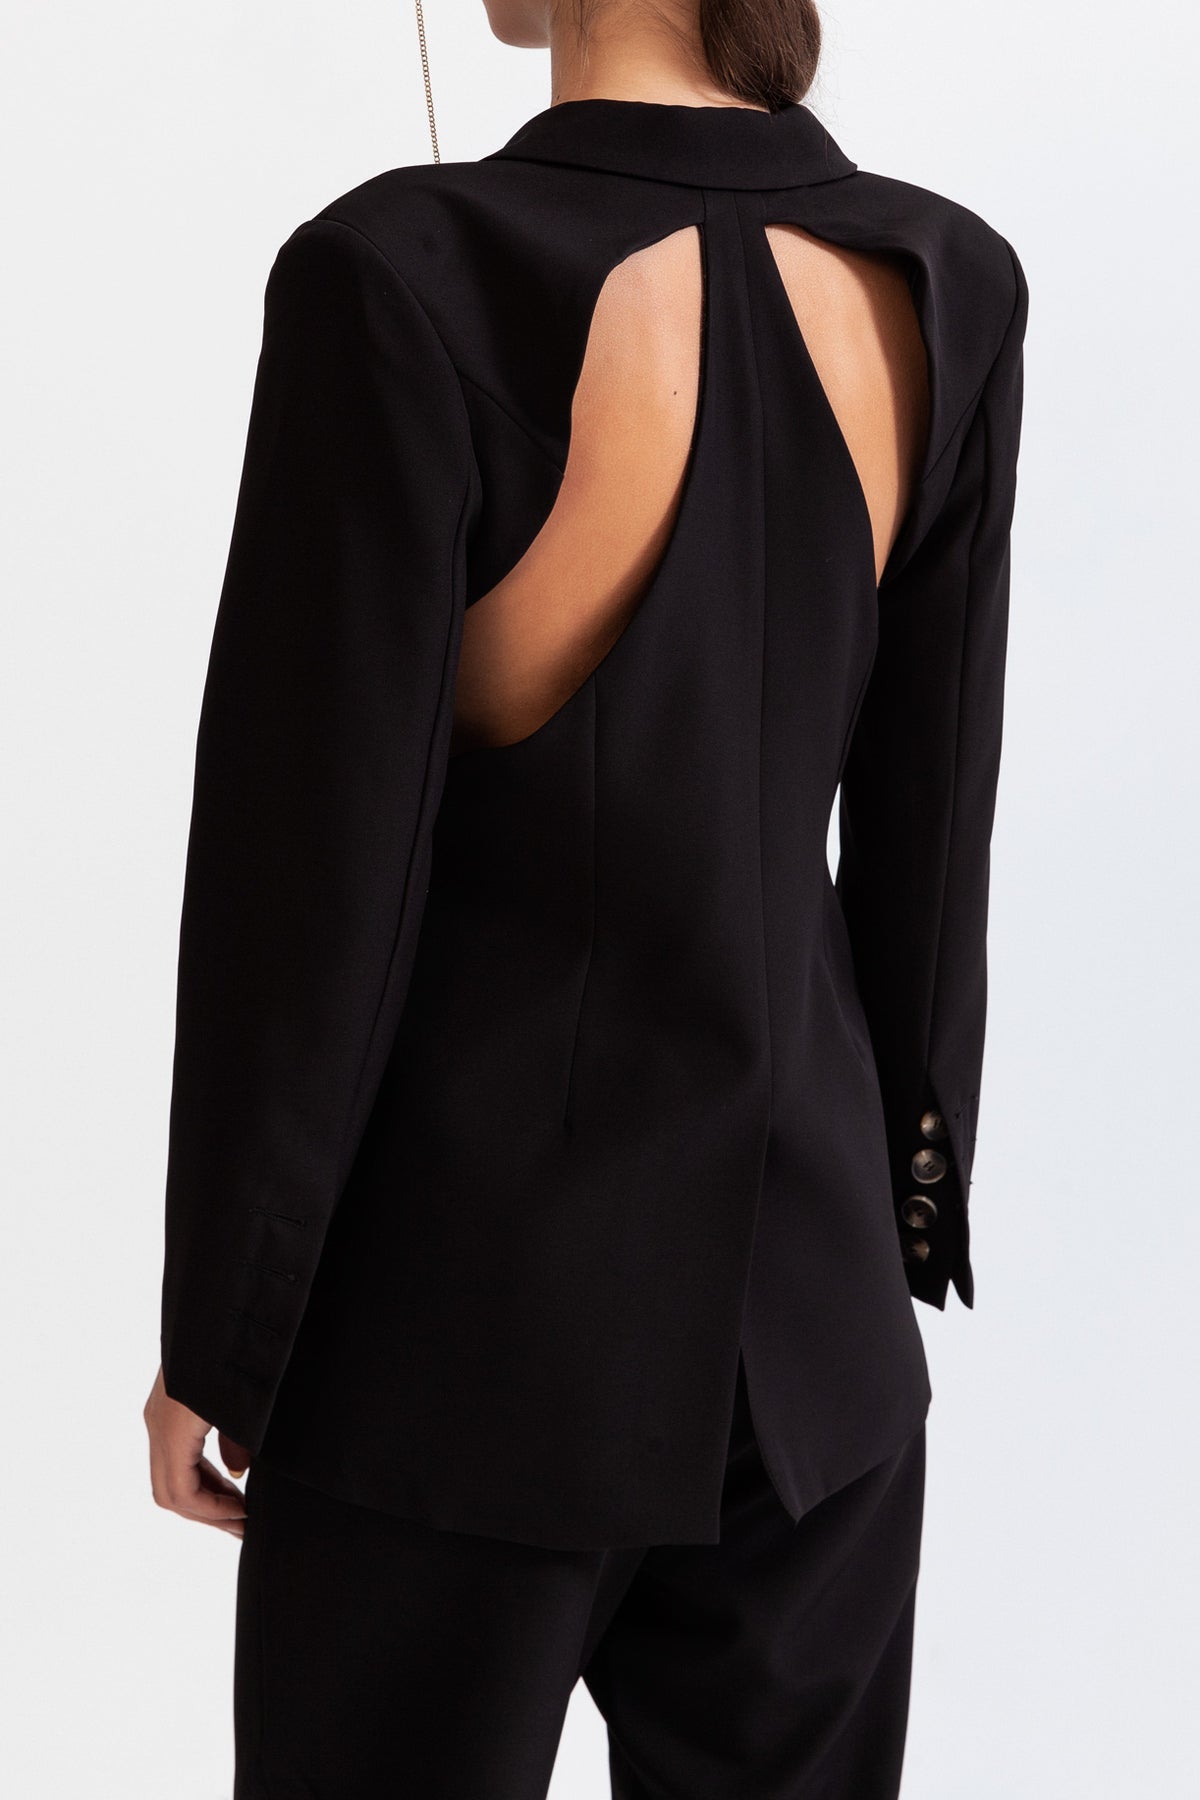 Hanna Hollowed-out Blazer And Pant Suit